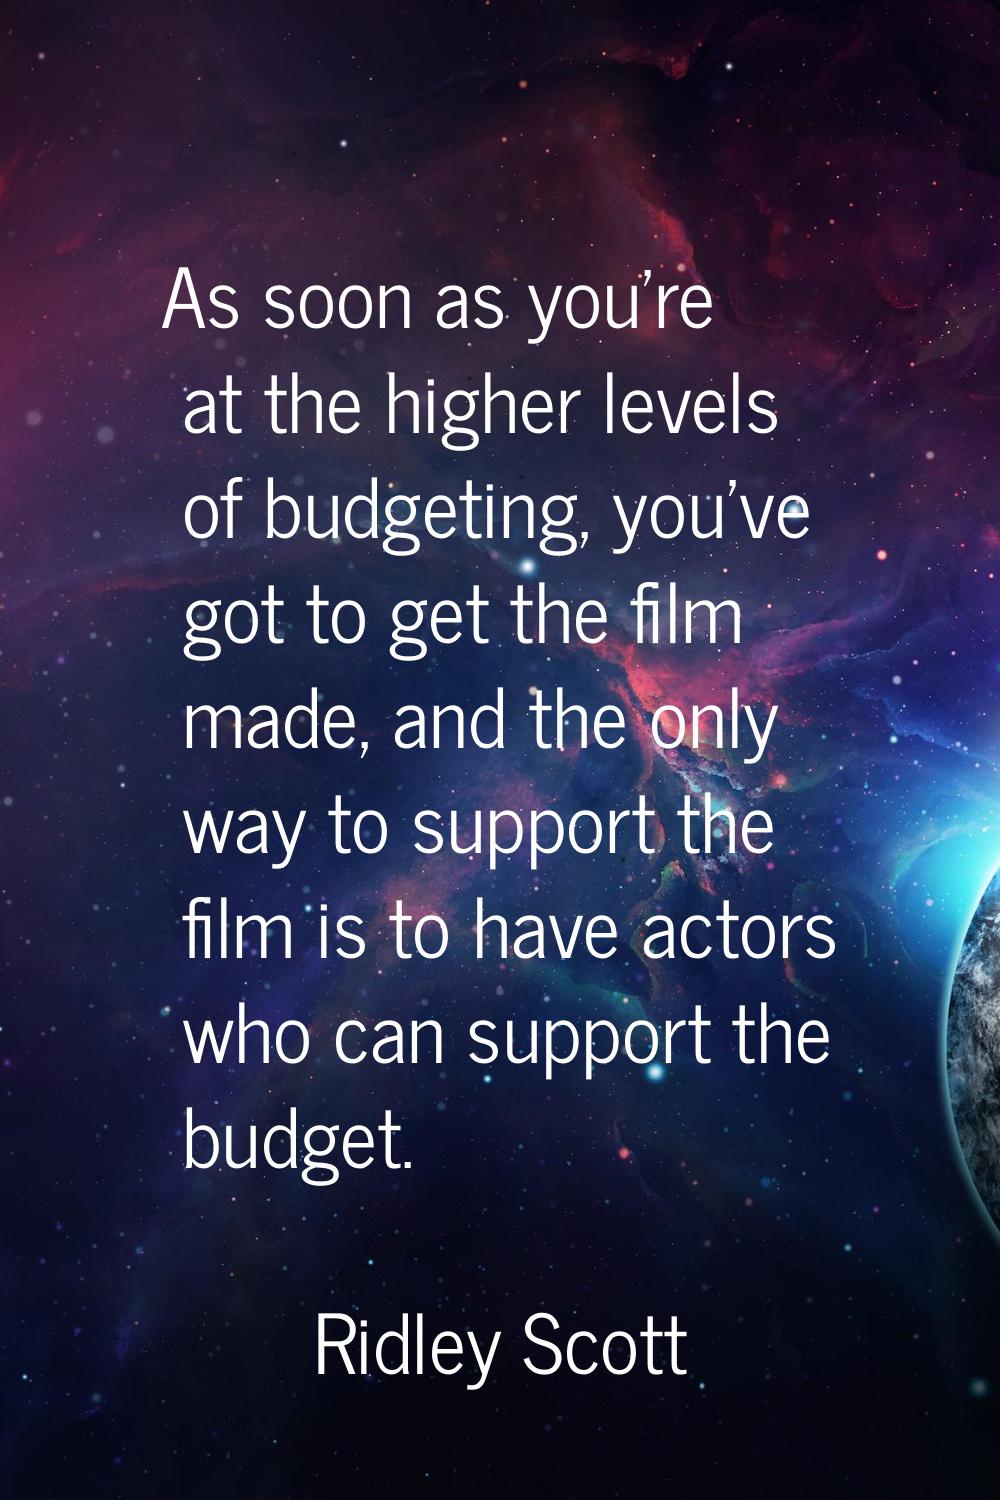 As soon as you're at the higher levels of budgeting, you've got to get the film made, and the only 